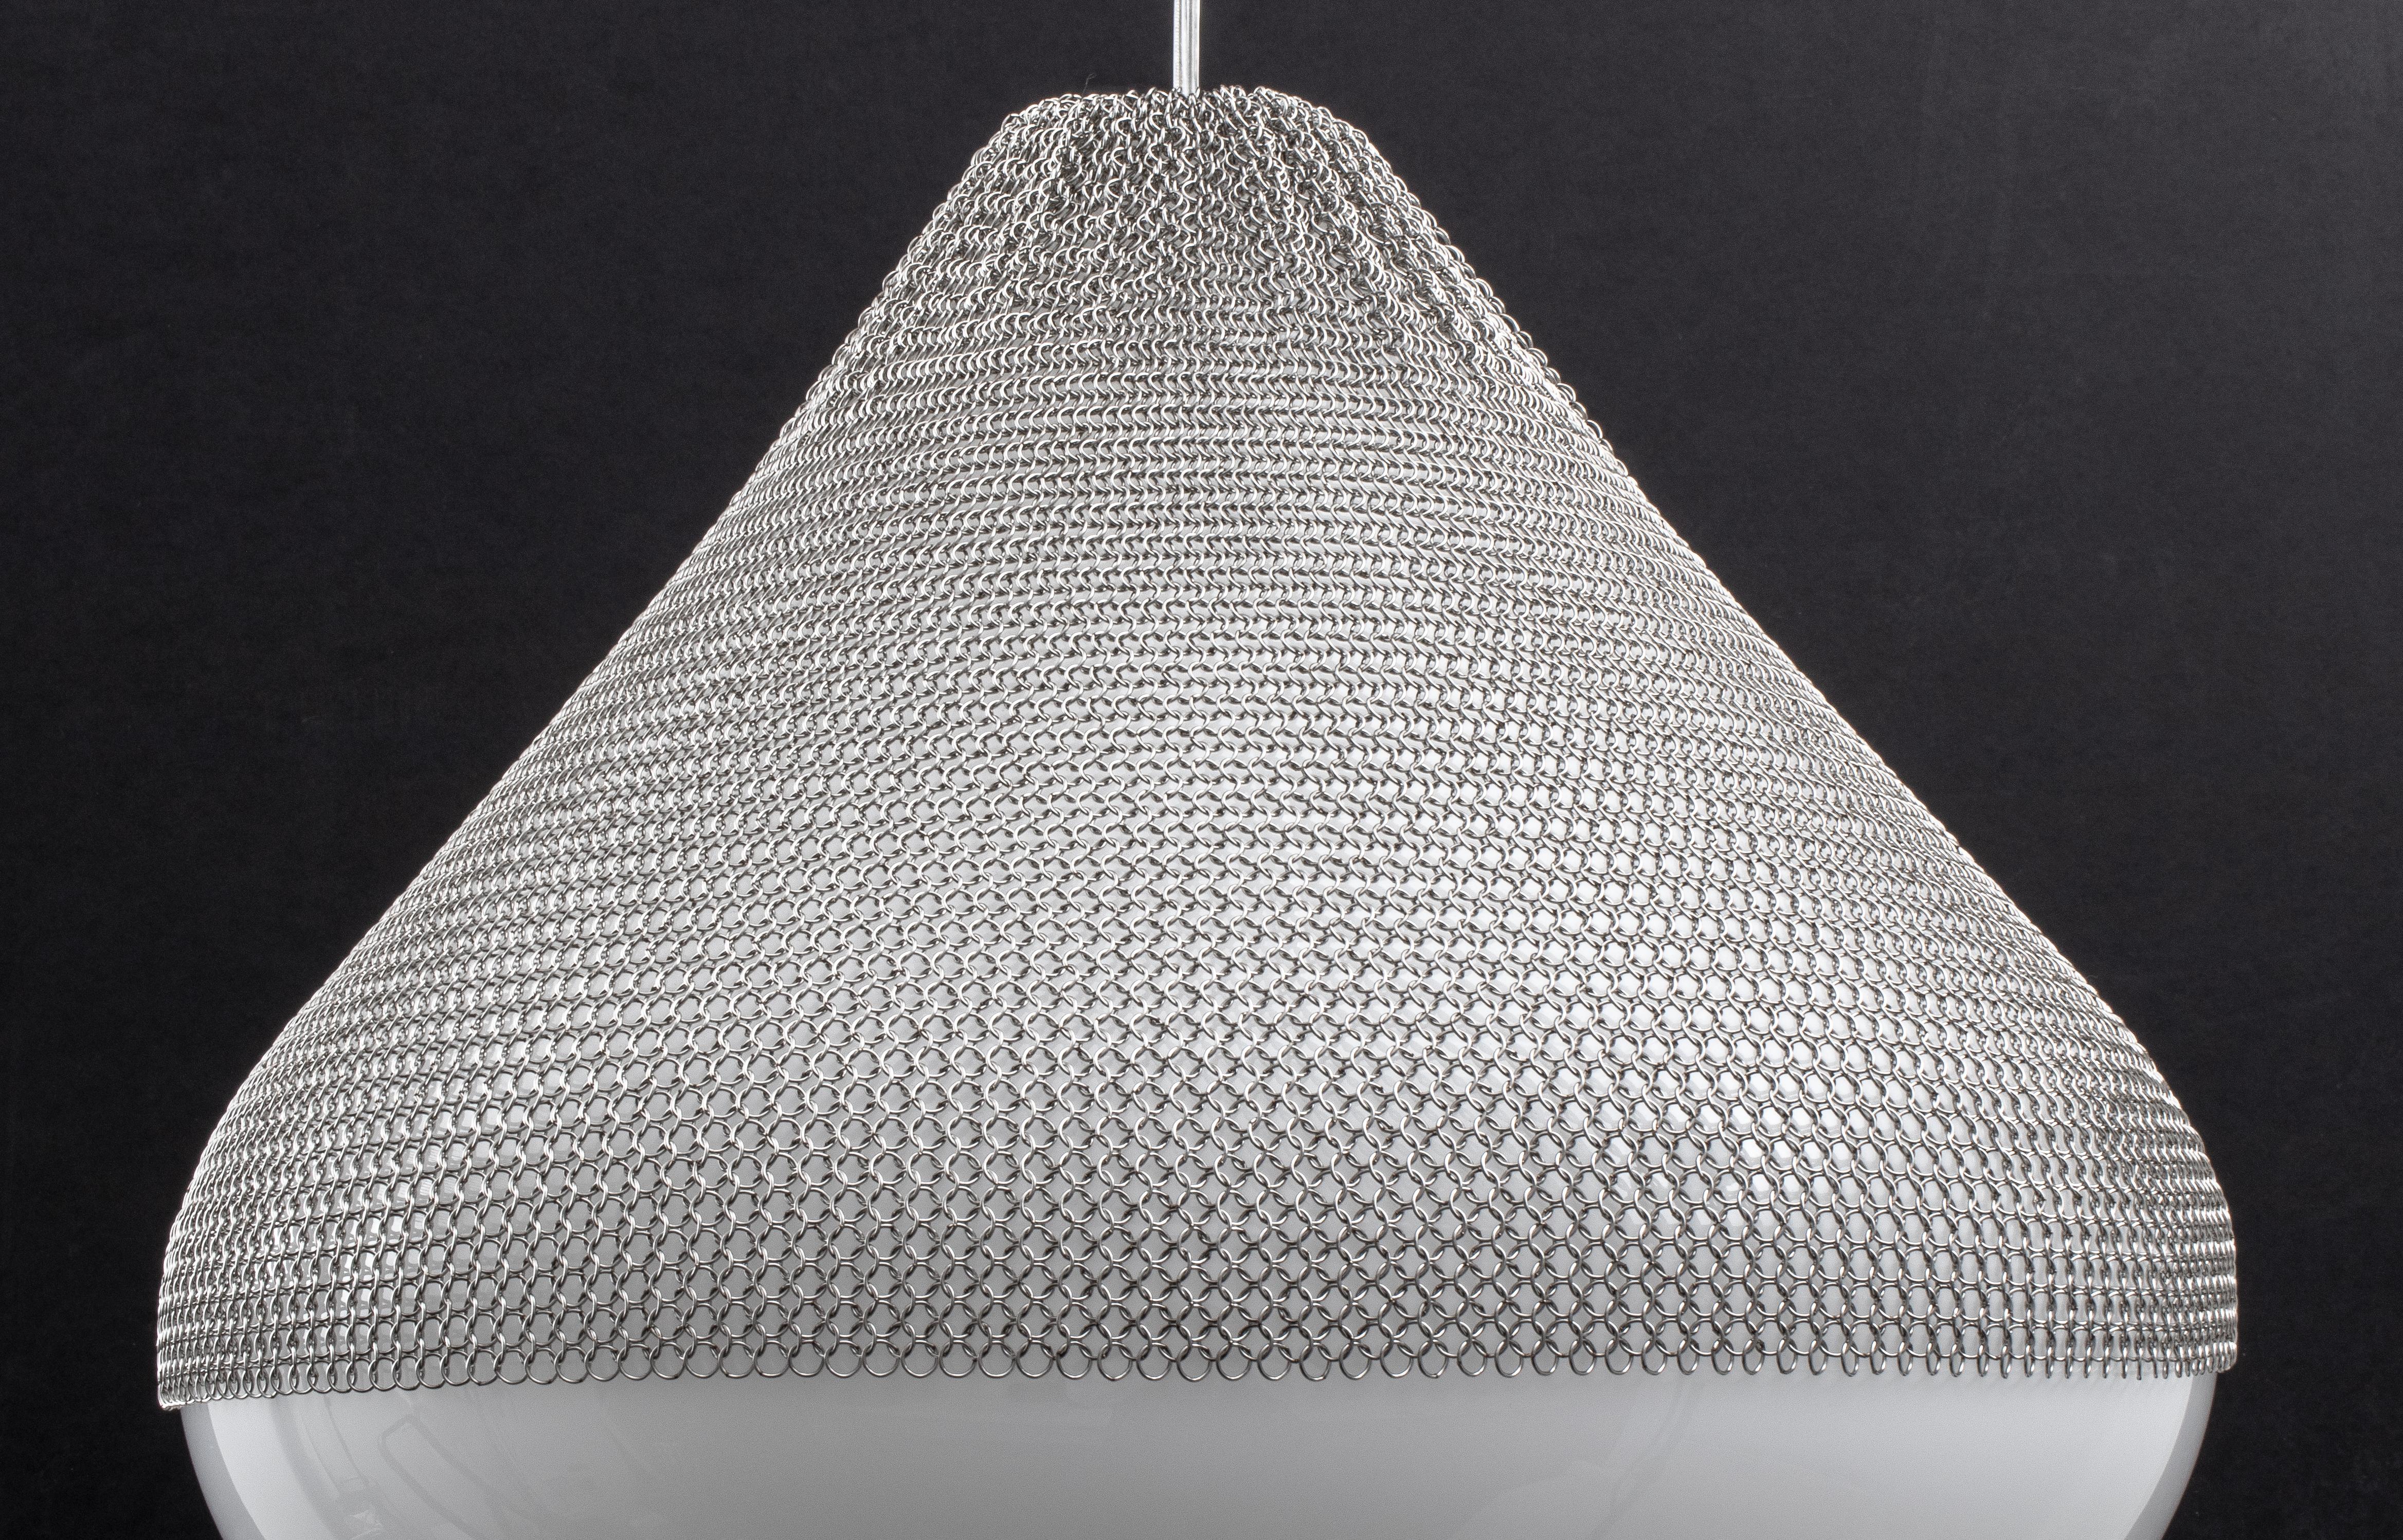 Pair of American Modern Futurist chain mail and glass large pendant light fixtures, unmarked. Light fixture: 17